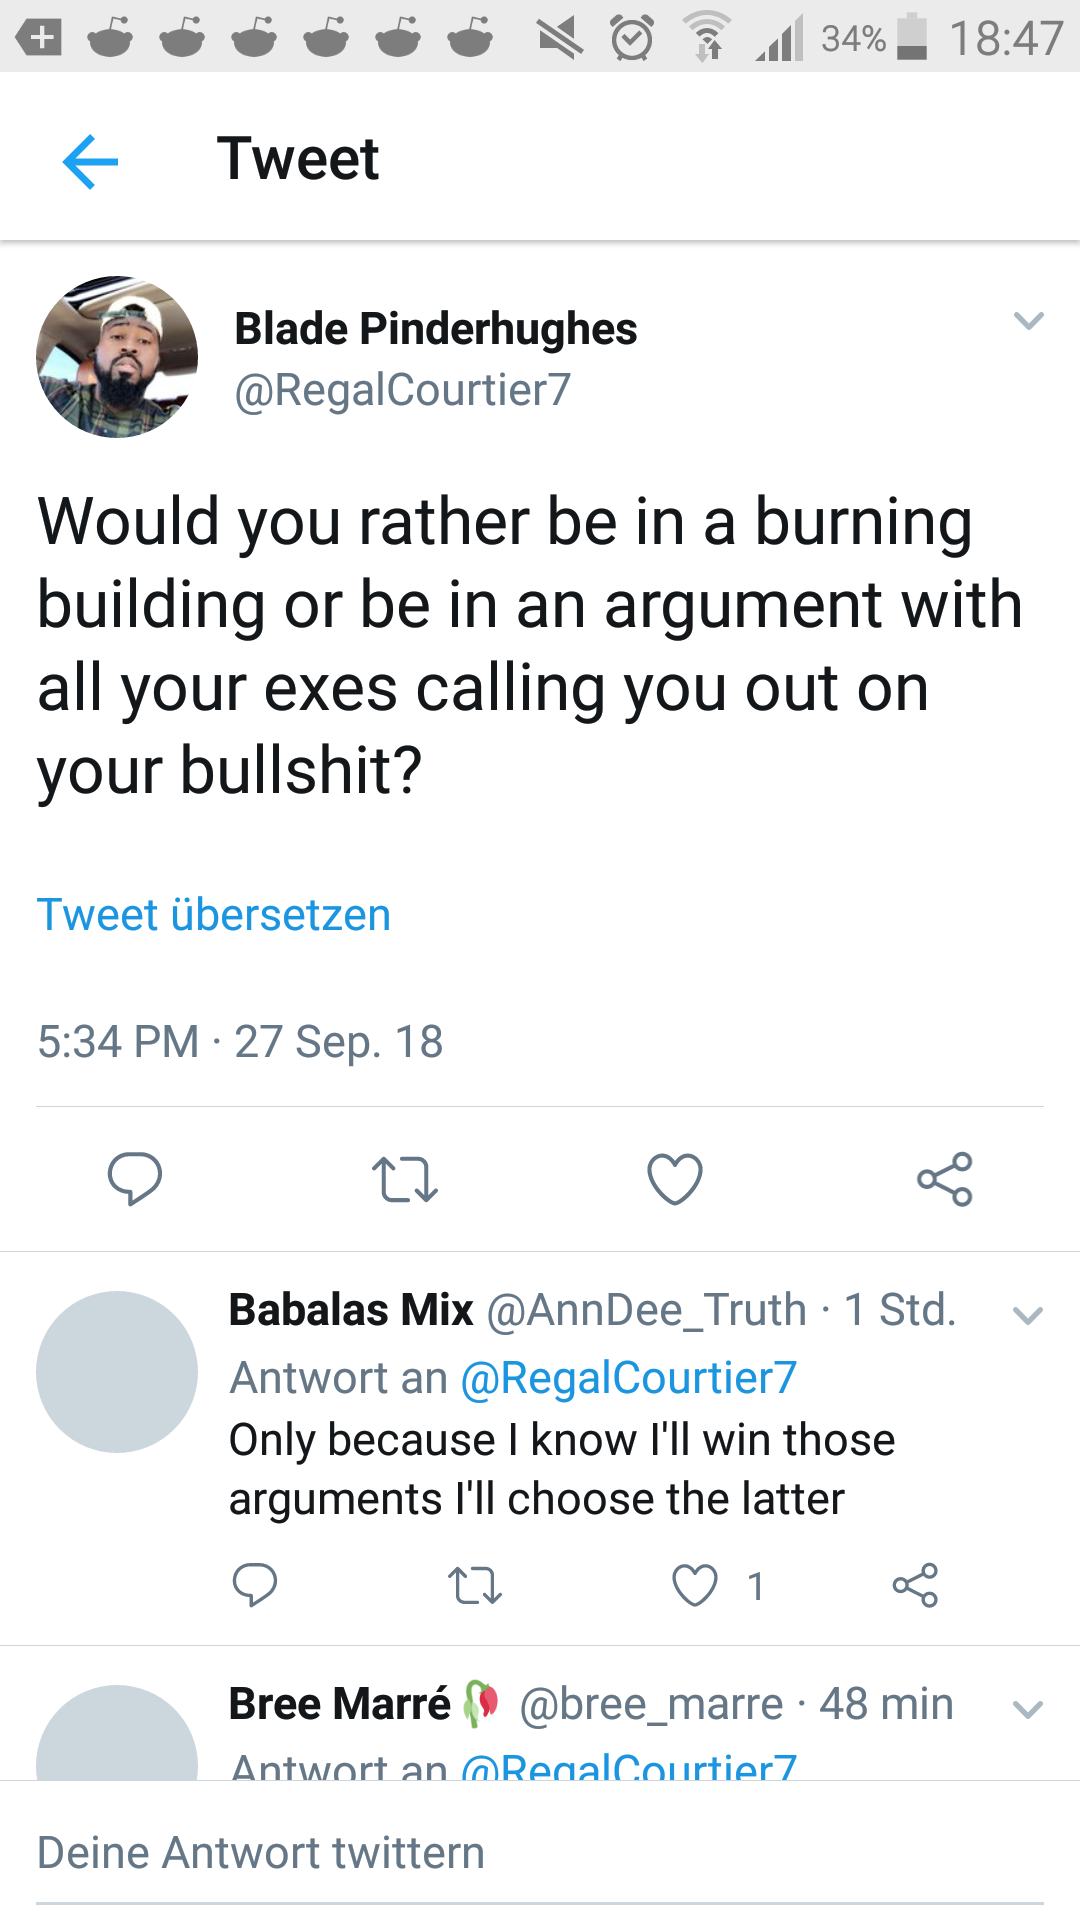 black twitter screenshot - 4 . . . . . . .| 34% Tweet Blade Pinderhughes Would you rather be in a burning building or be in an argument with all your exes calling you out on your bullshit? Tweet bersetzen 27 Sep. 18 o 22 o 8 v Babalas Mix 1 Std. Antwort a